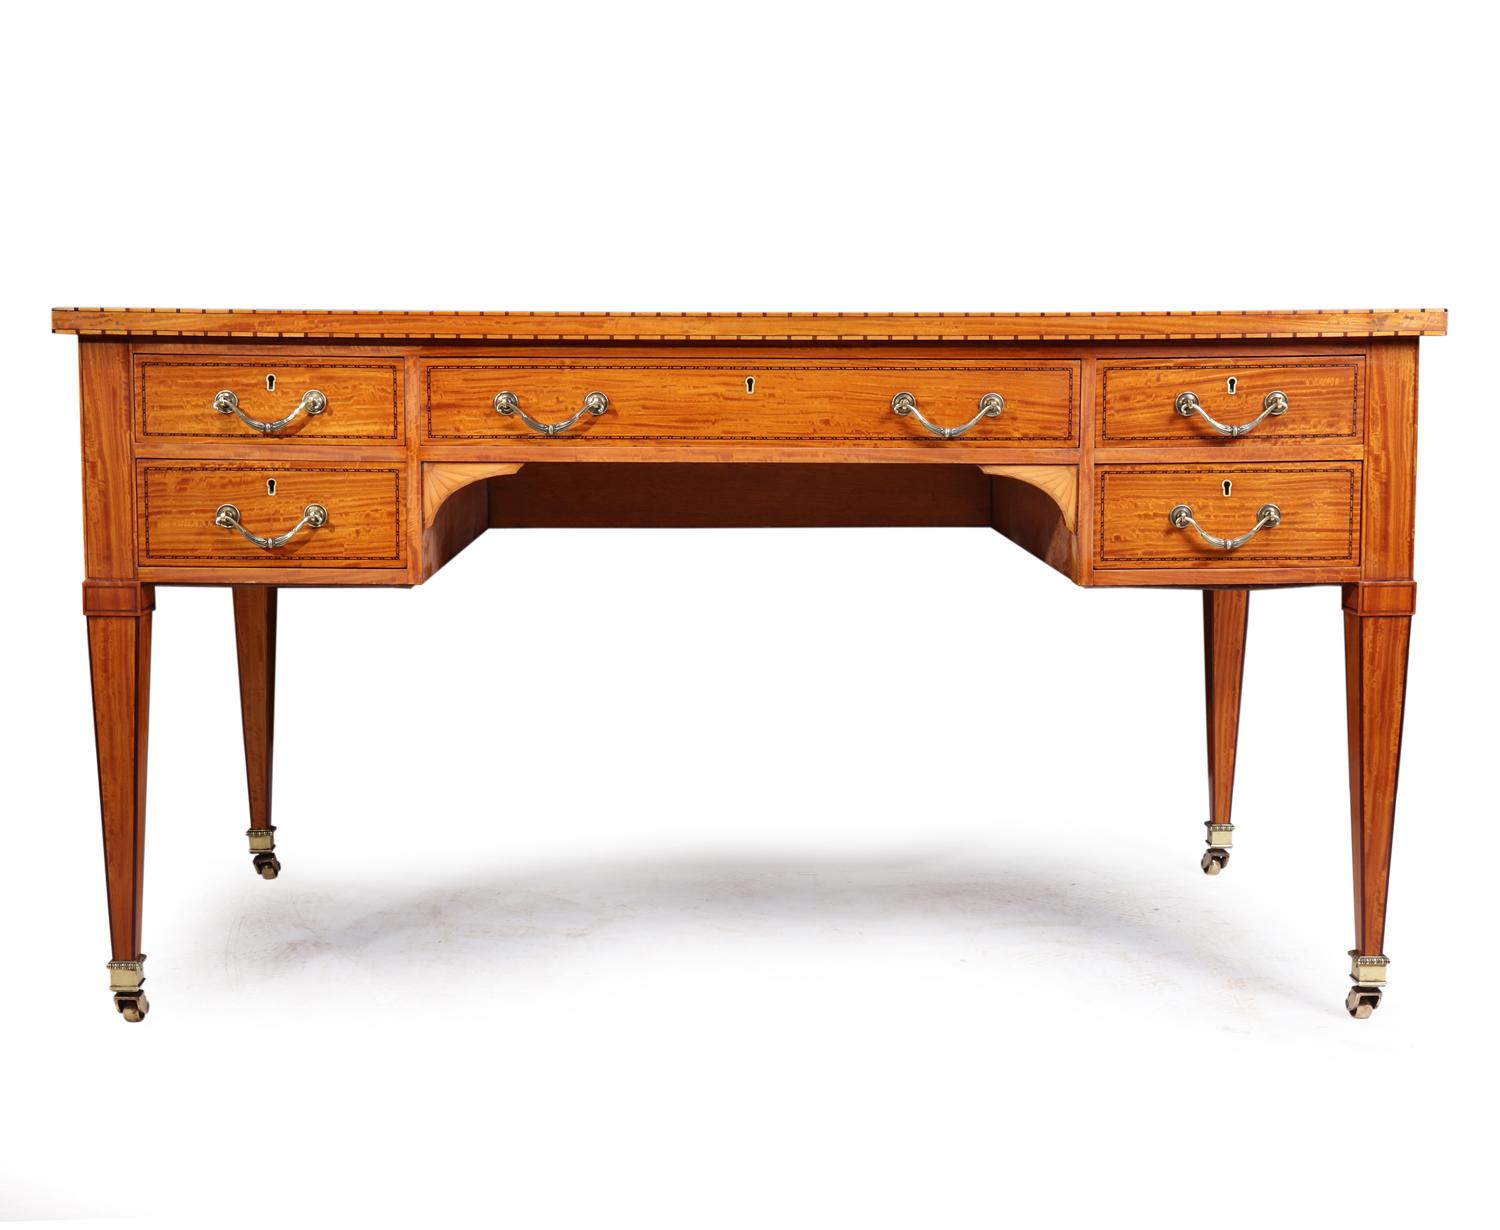 Antique satinwood desk, circa 1890

A antique satinwood desk produced in Paris in circa 1890, it has five drawer with swan neck handles and English locks, it has extra space slides to either side, original leather top, tulipwood and ebony inlay